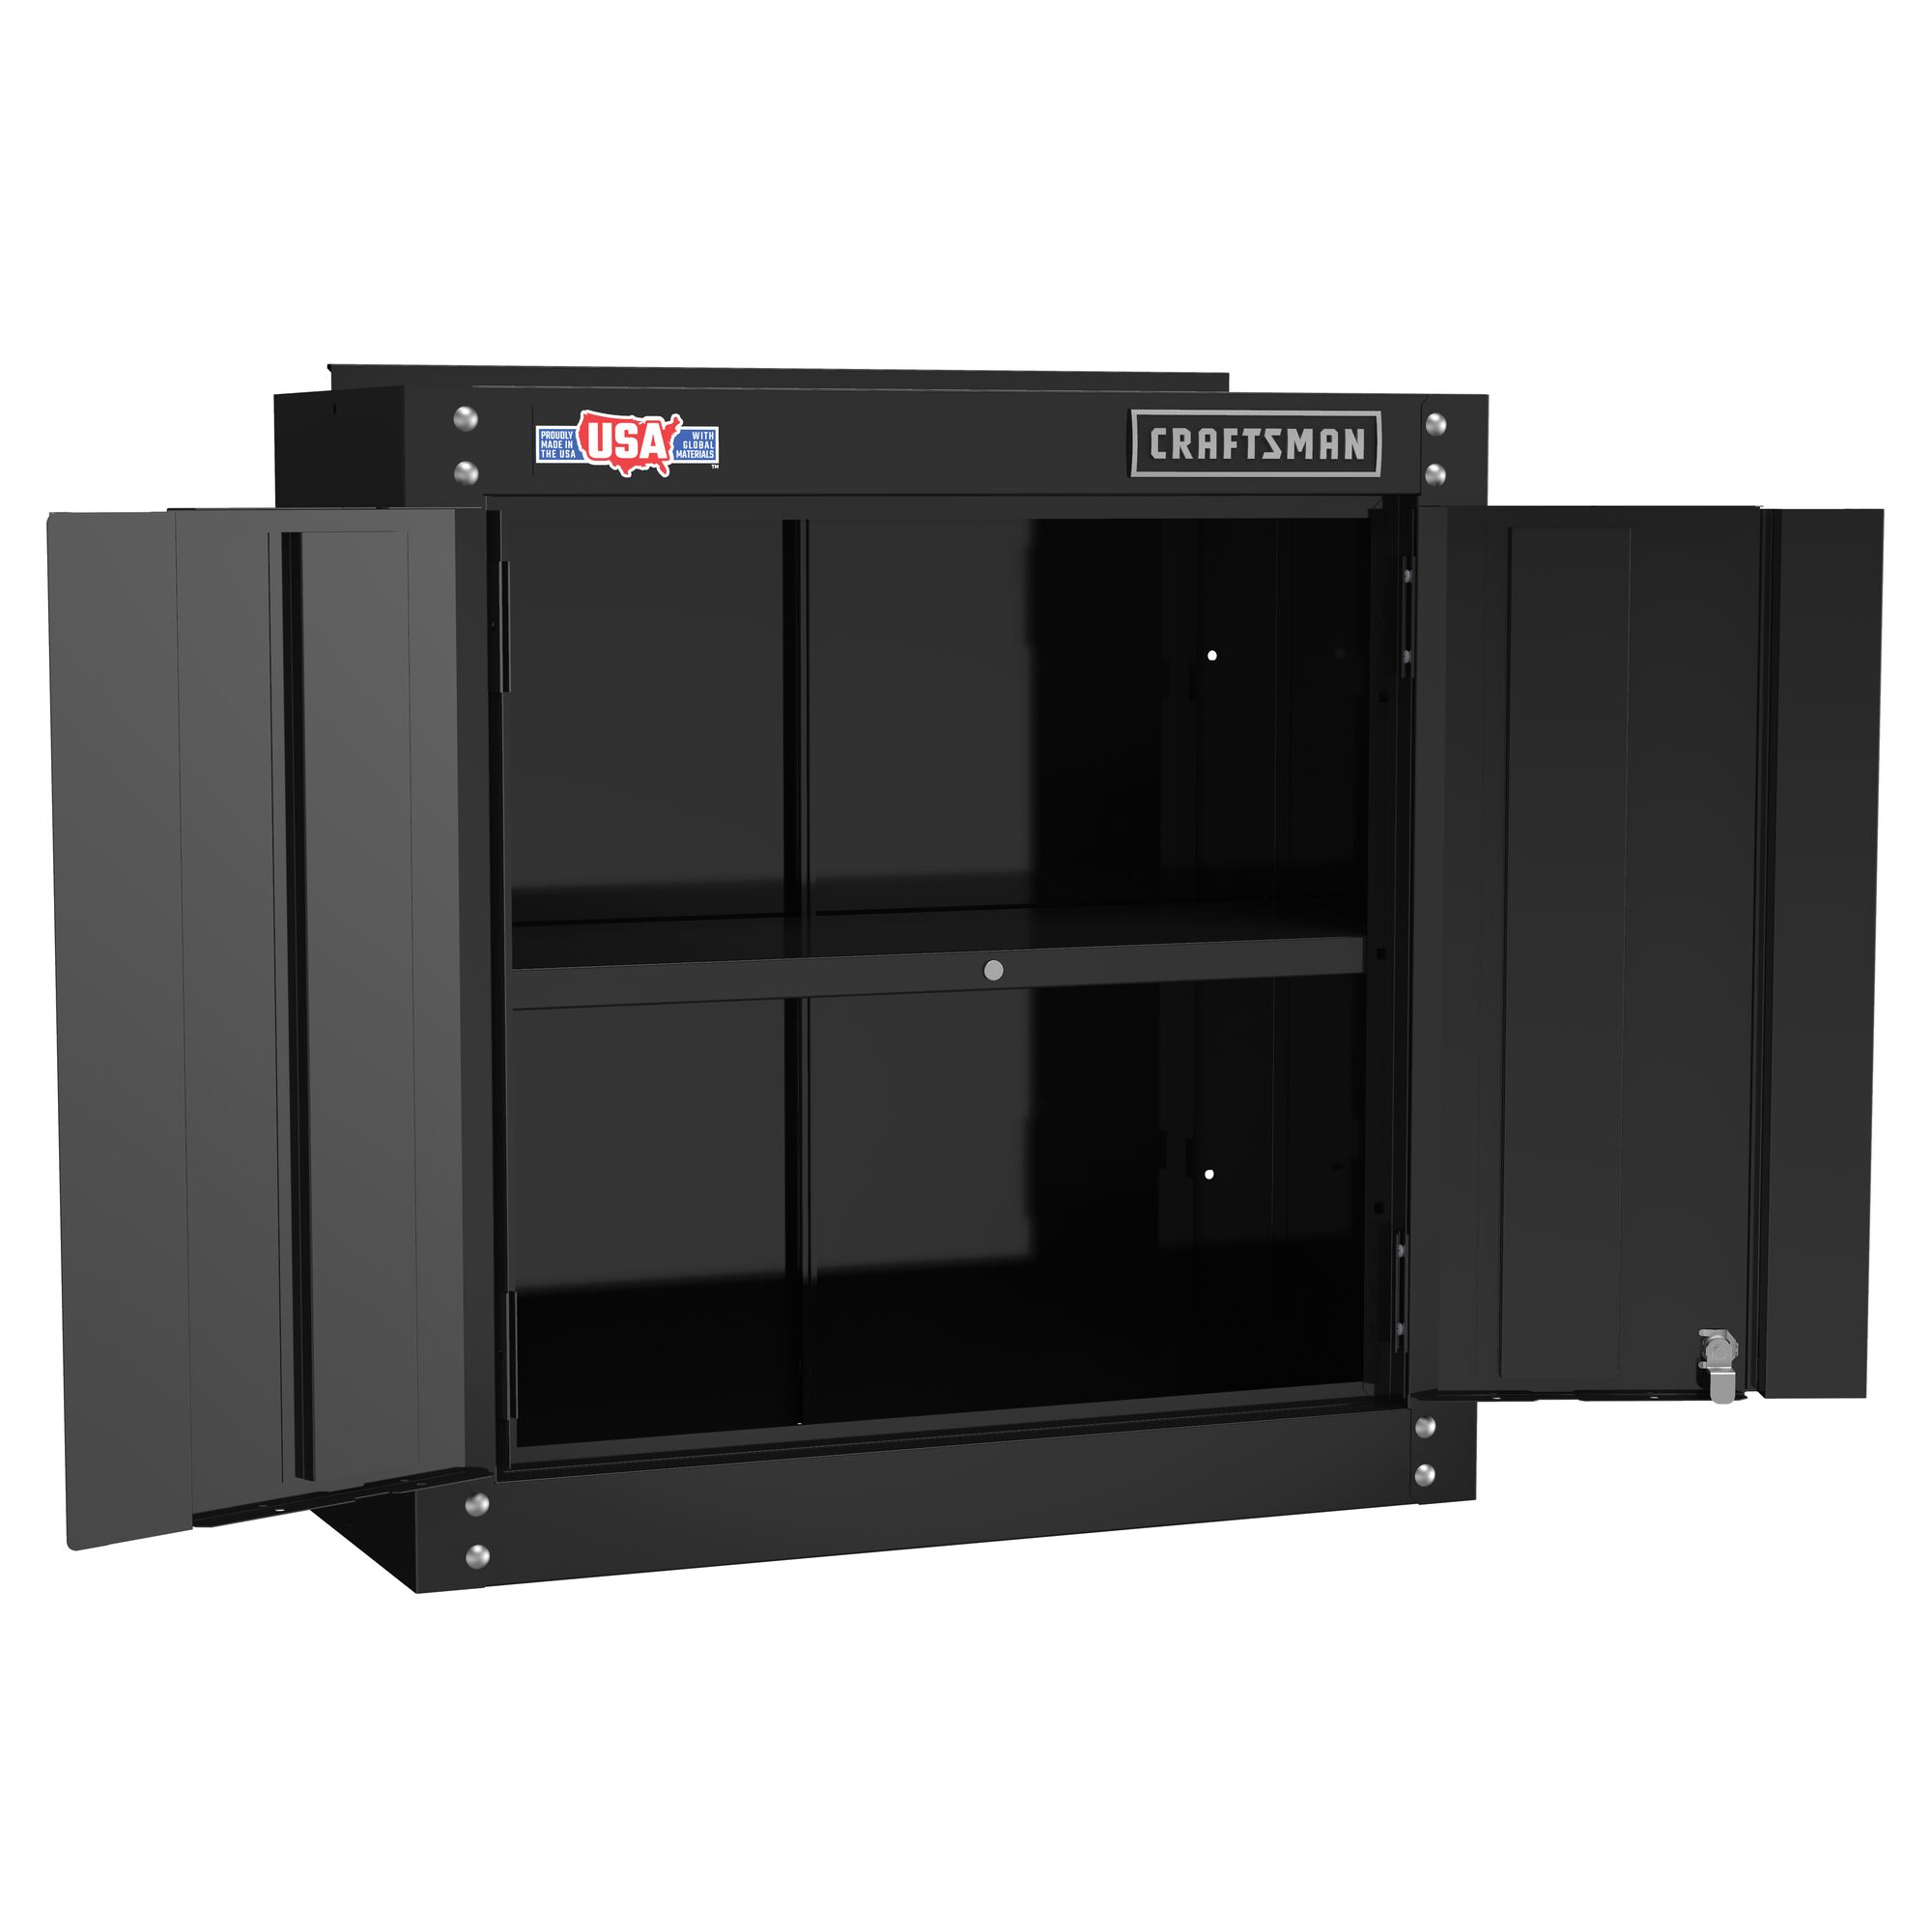 CRAFTSMAN 28-in wide by 28-in high storage wall cabinet angled view with doors open